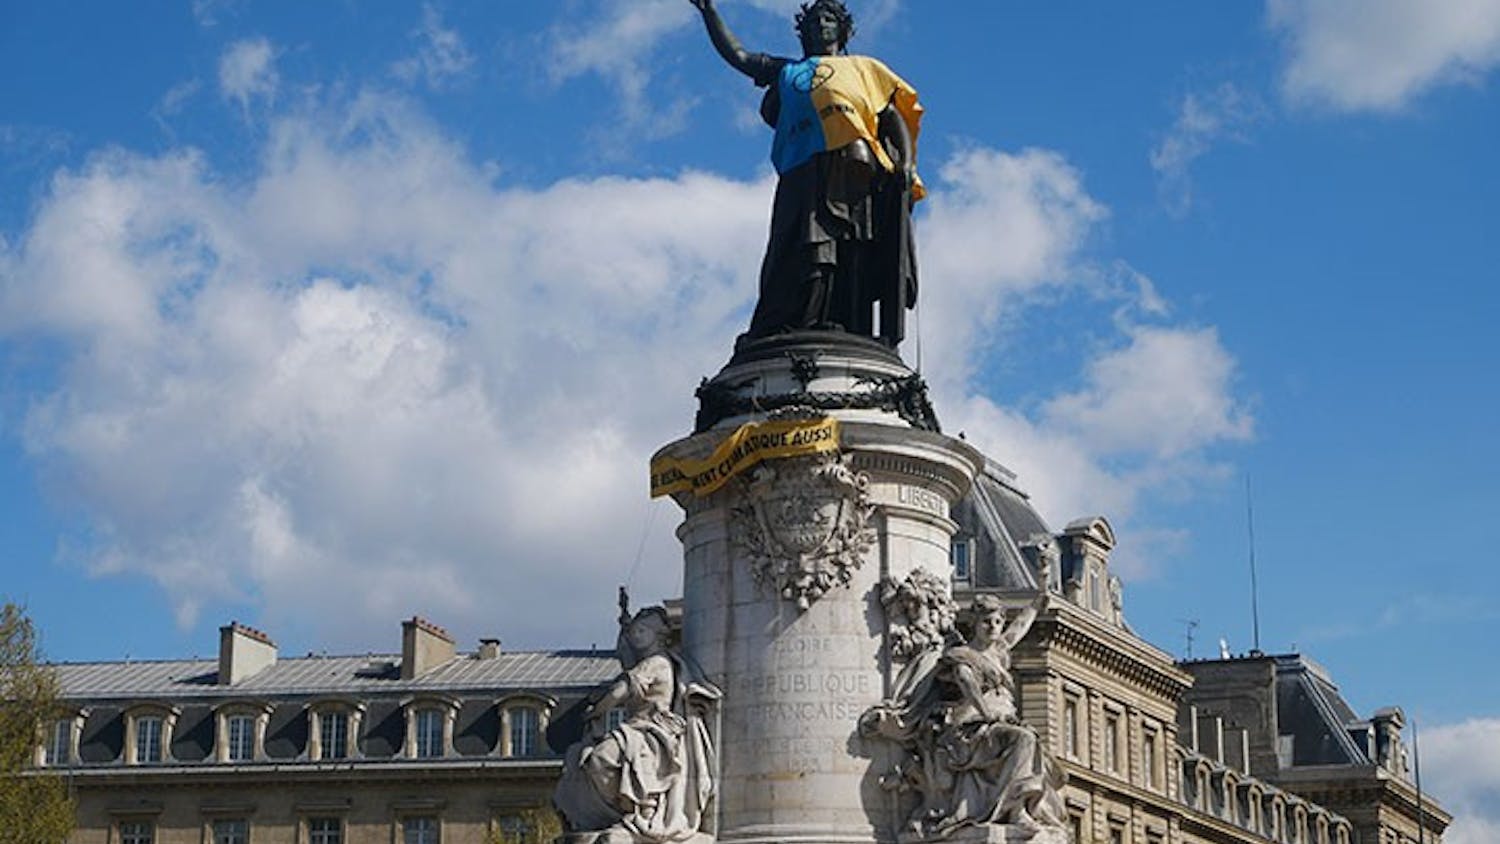 A statue of Marianne, the embodiment of the French Republic, stands over the Place de la République in Paris, France, draped with the Ukrainian flag and the phrase ‘stop oil, stop war.’